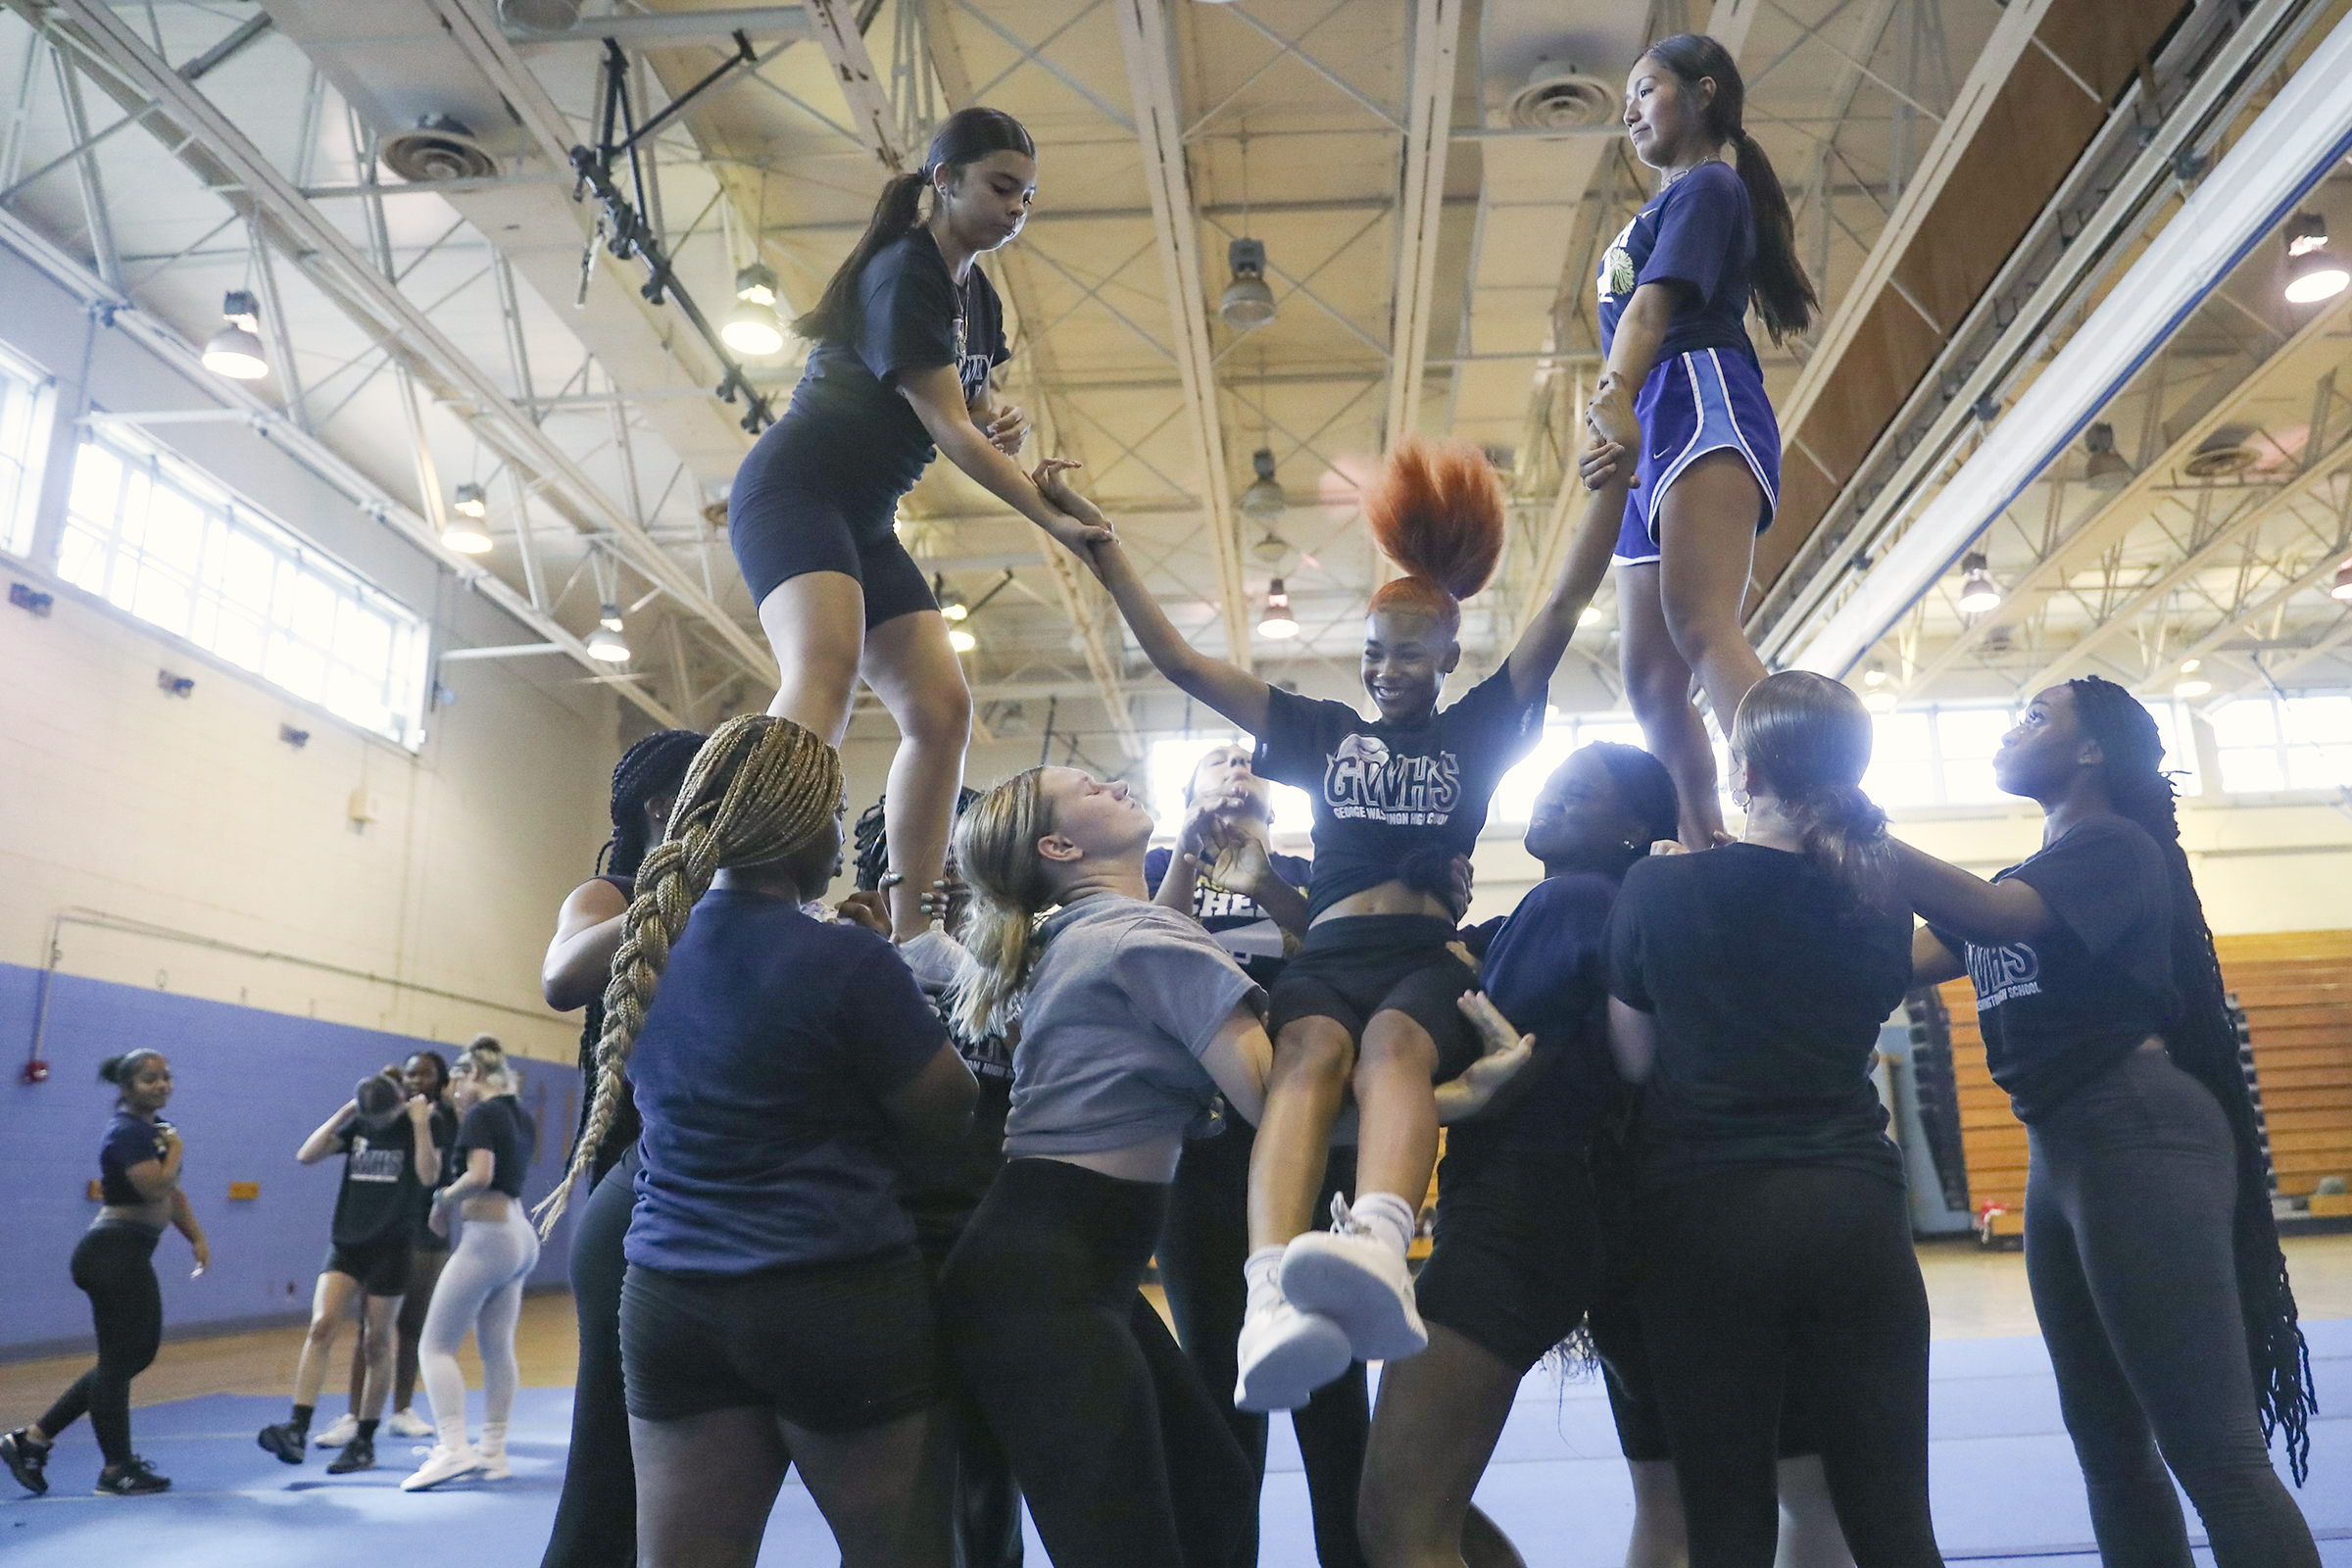 The George Washington cheer team is Phillys first to make it to nationals